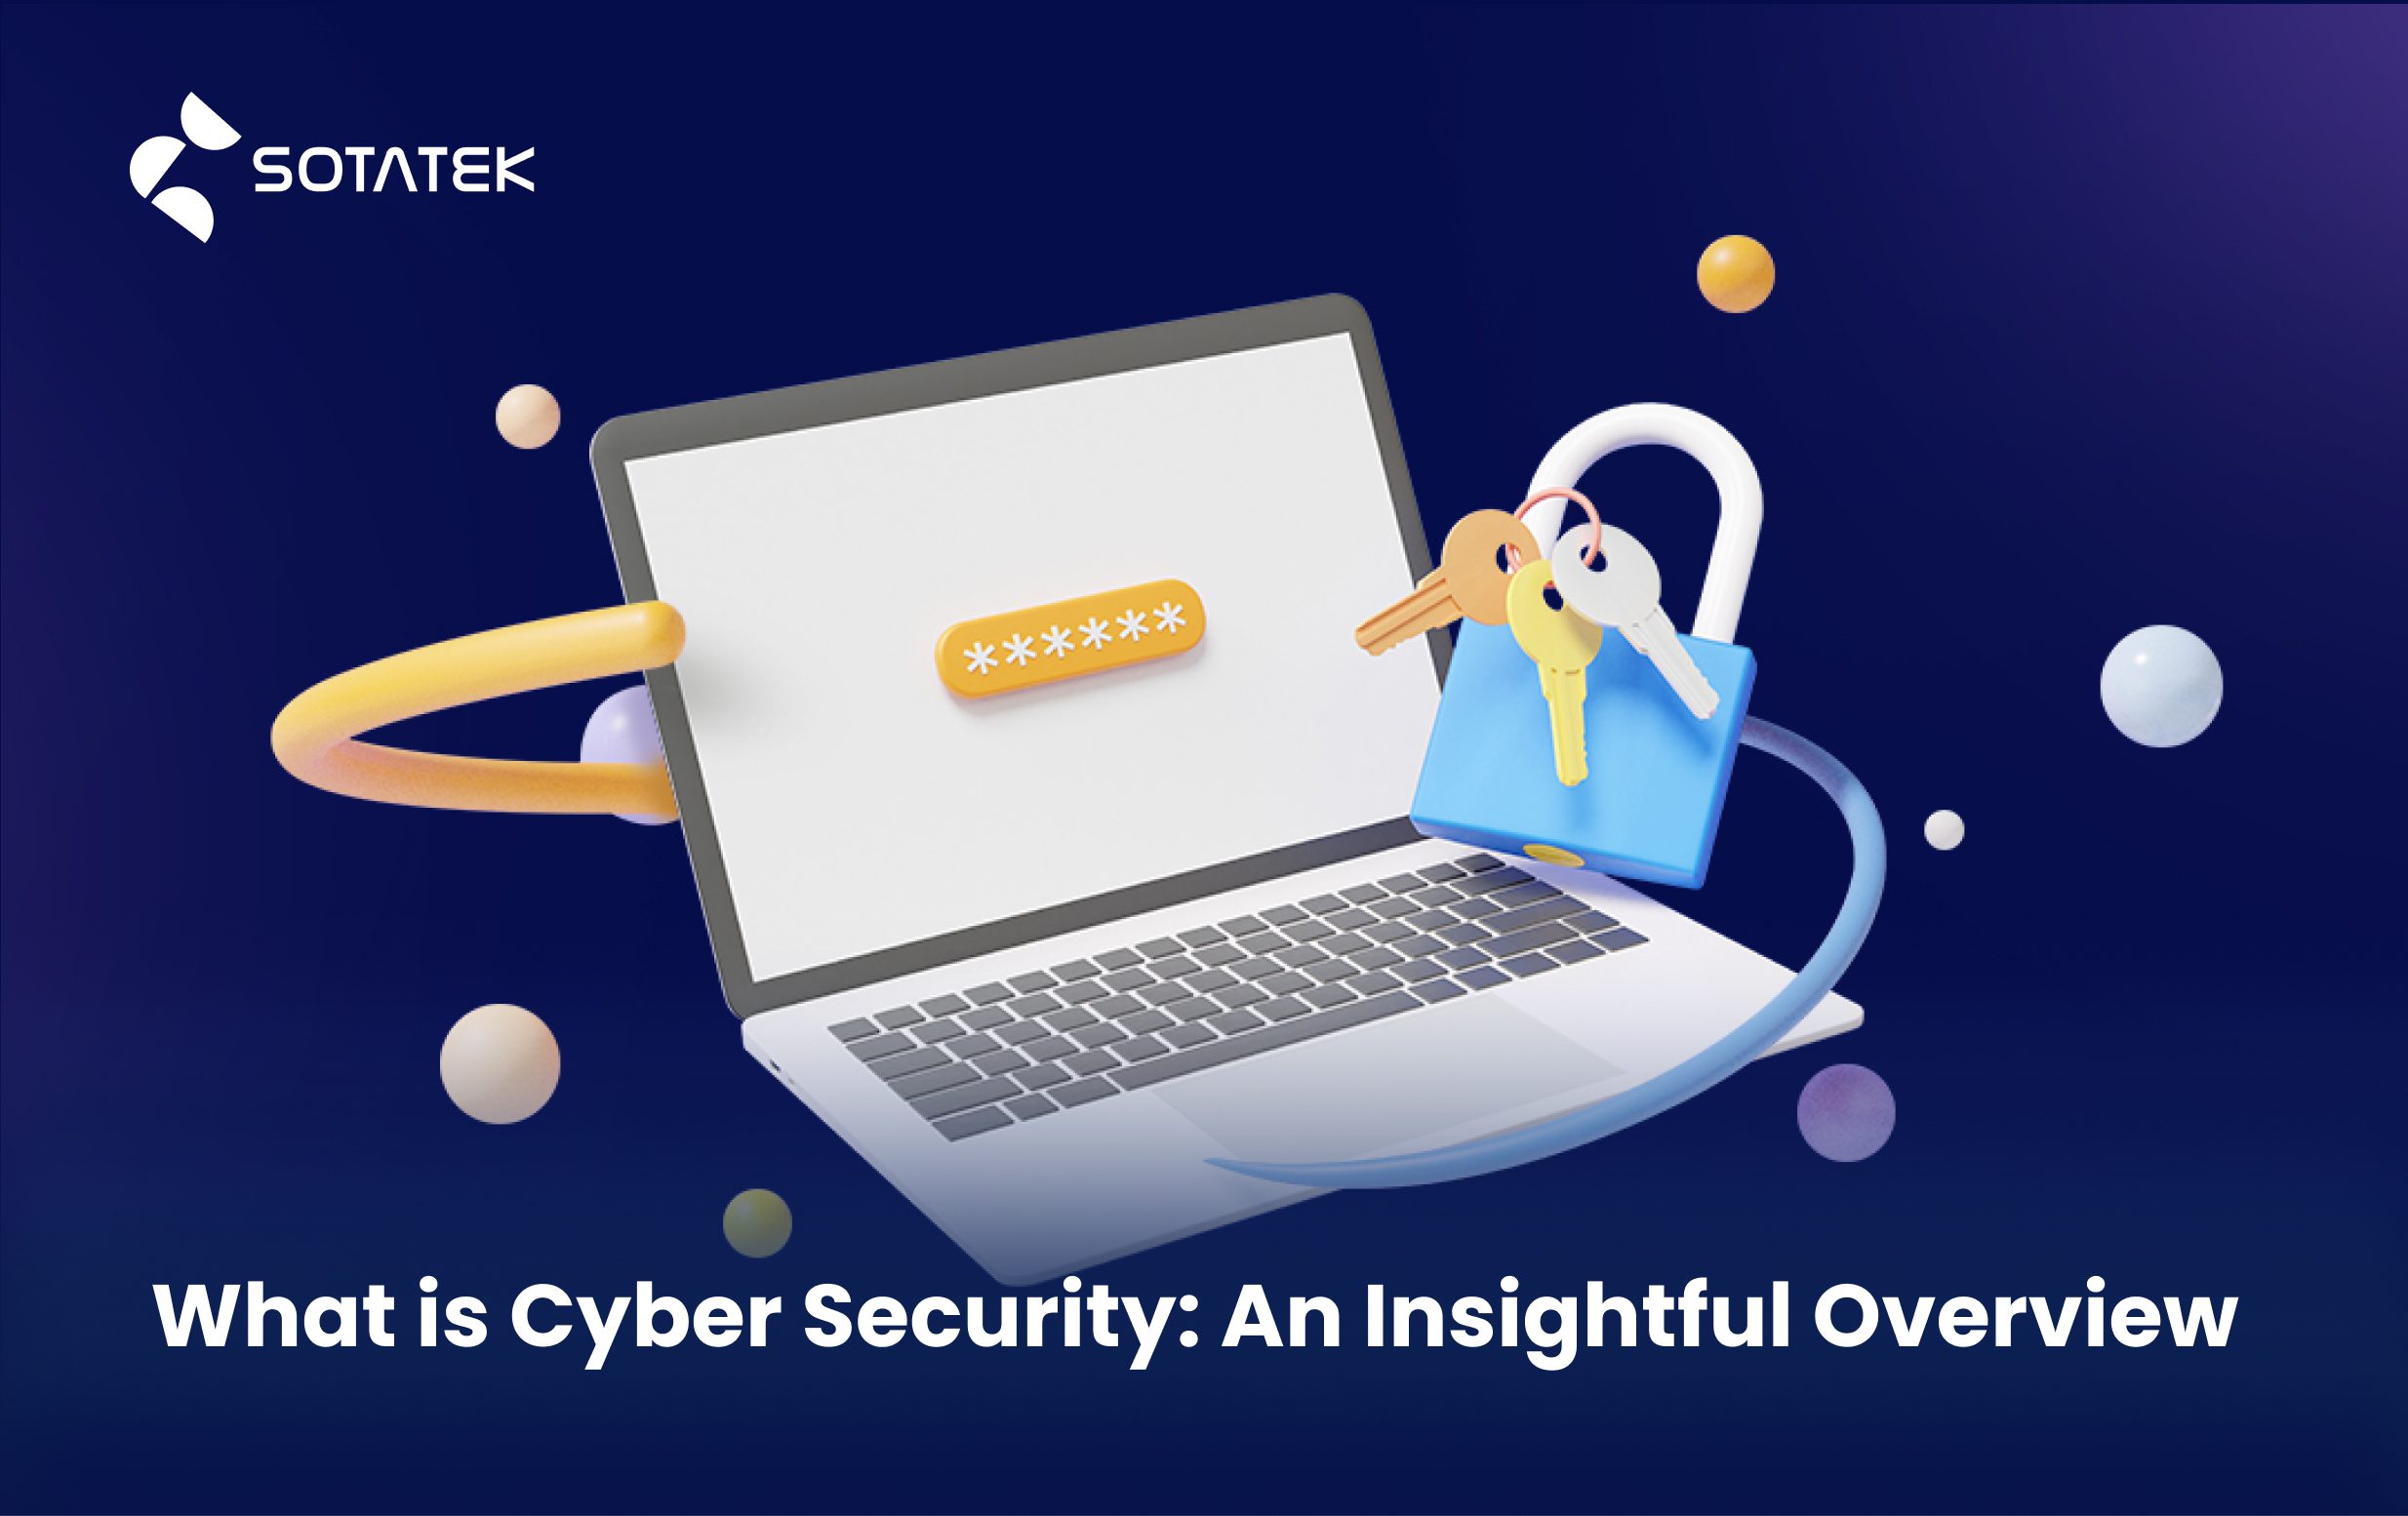 What is Cyber Security: An Insightful Overview